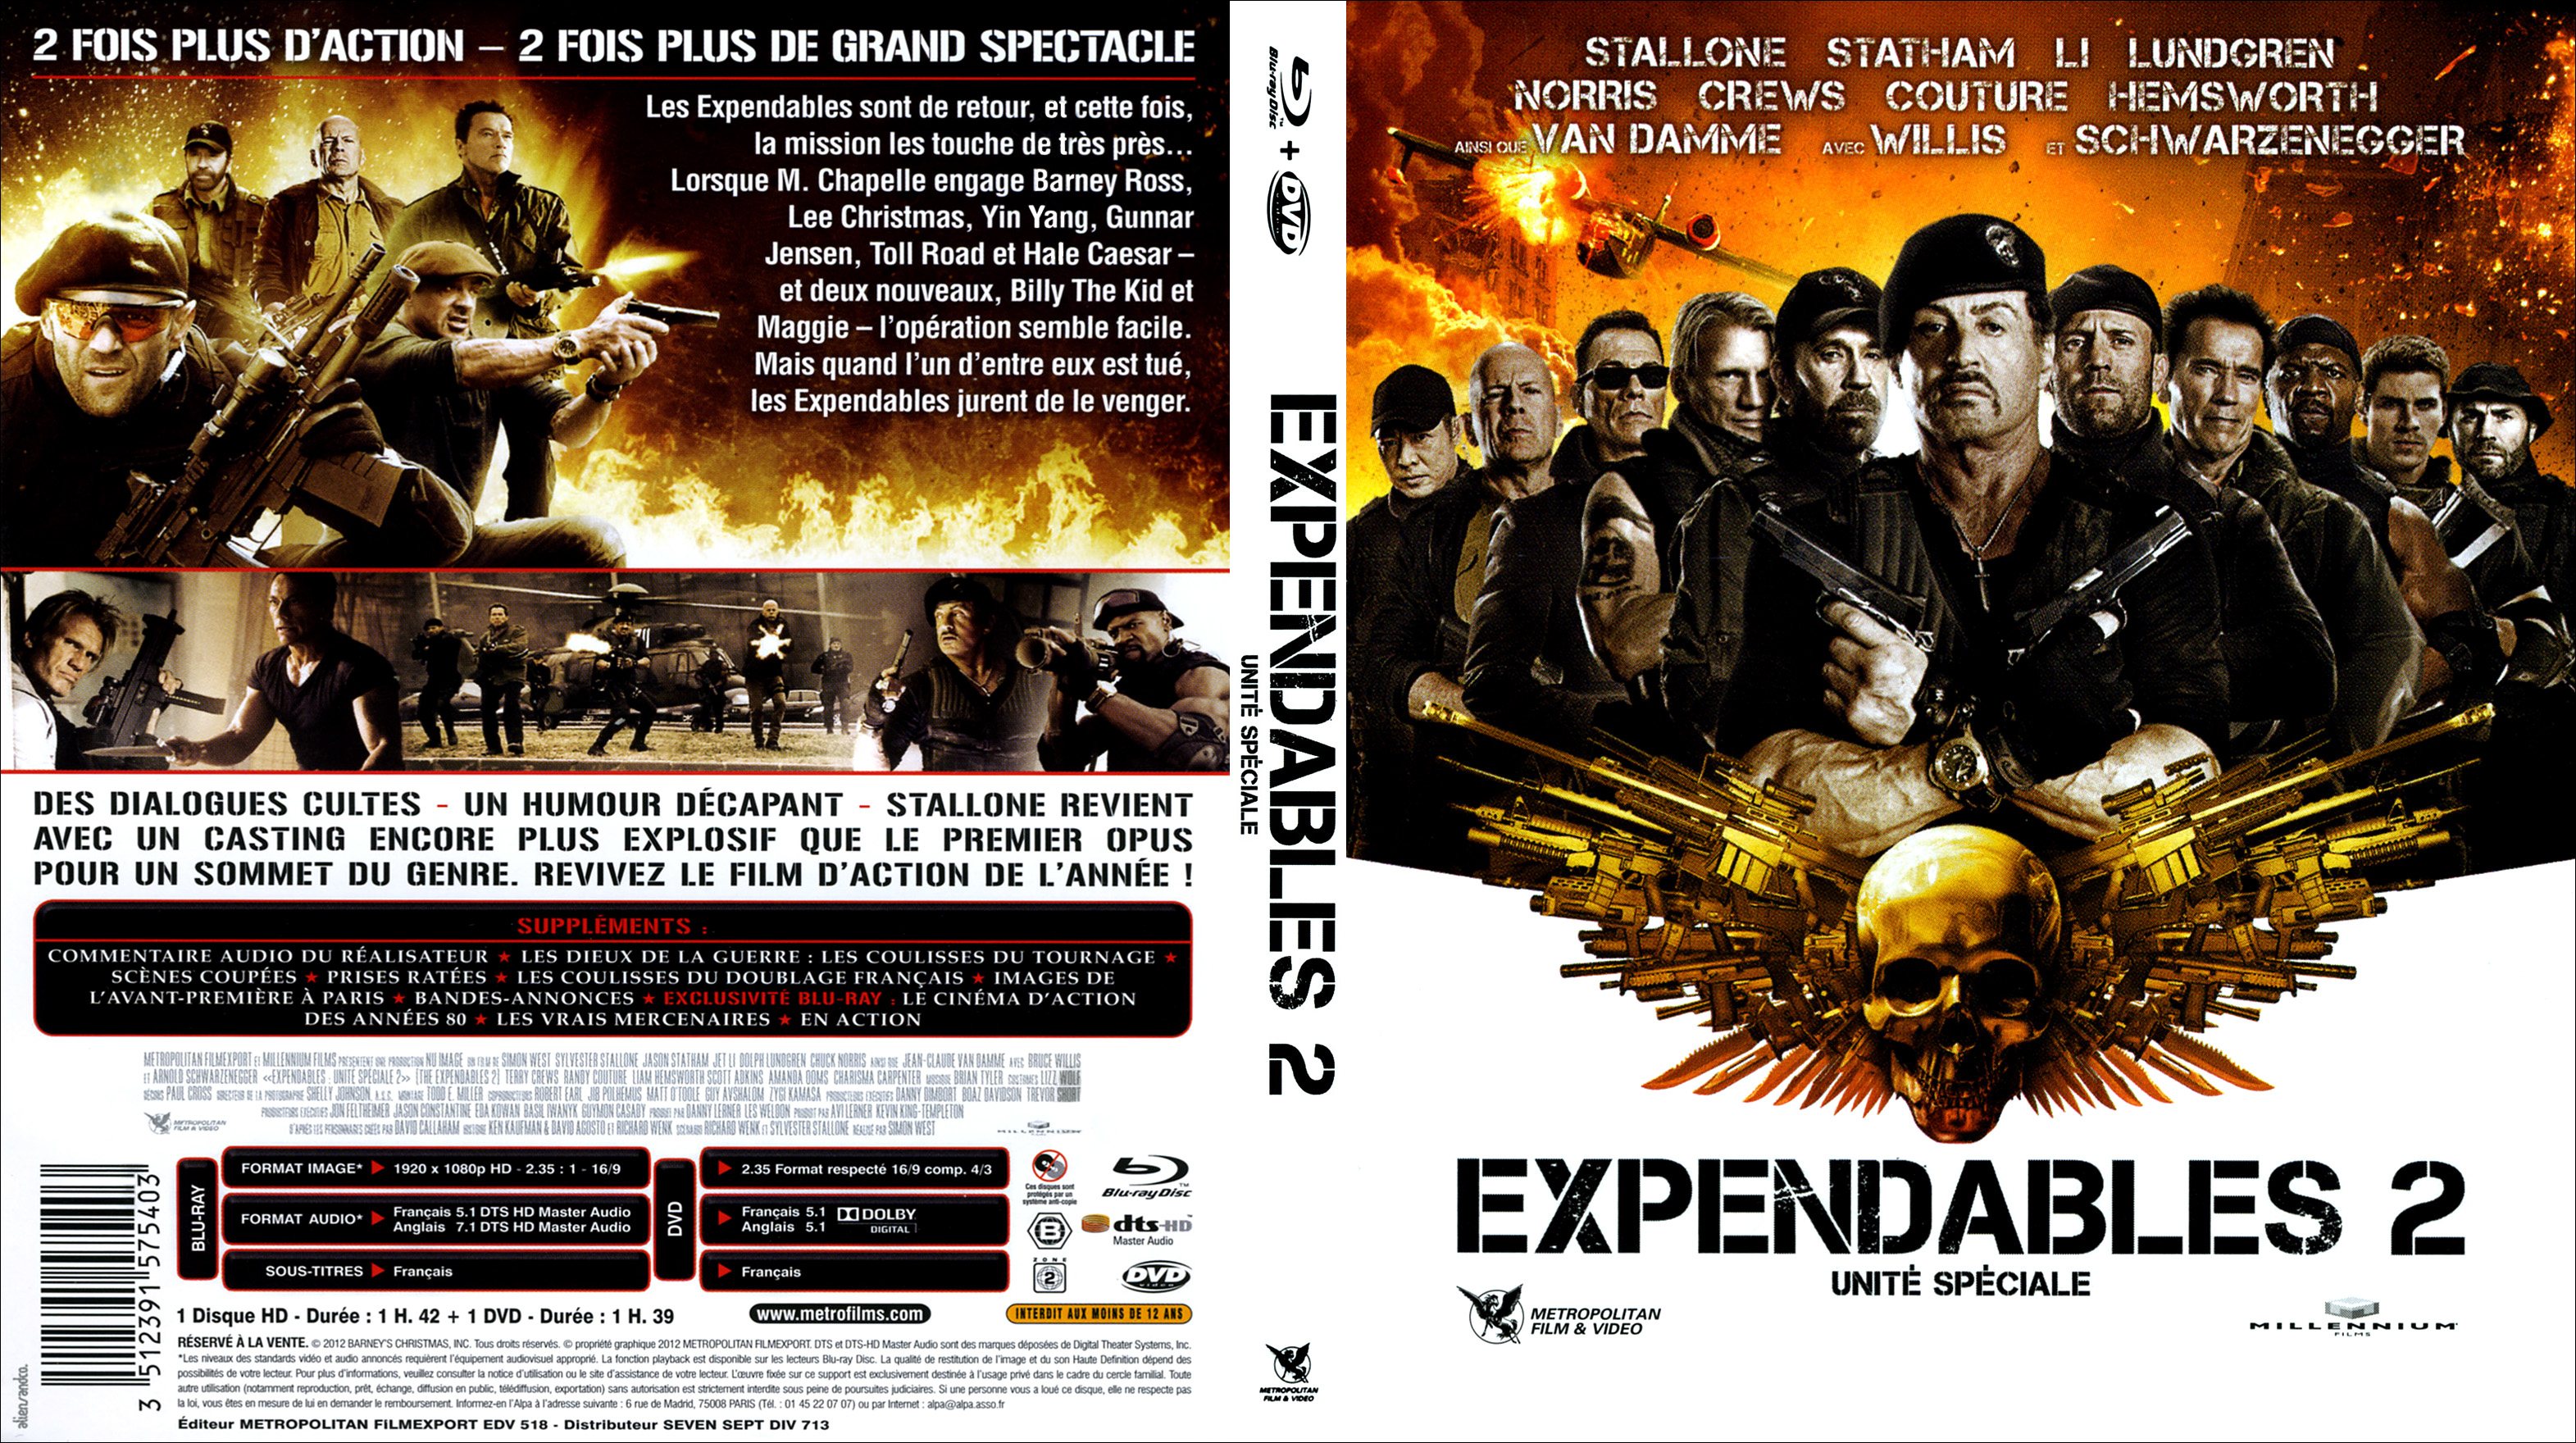 Jaquette DVD The Expendables 2 (BLU-RAY) v3